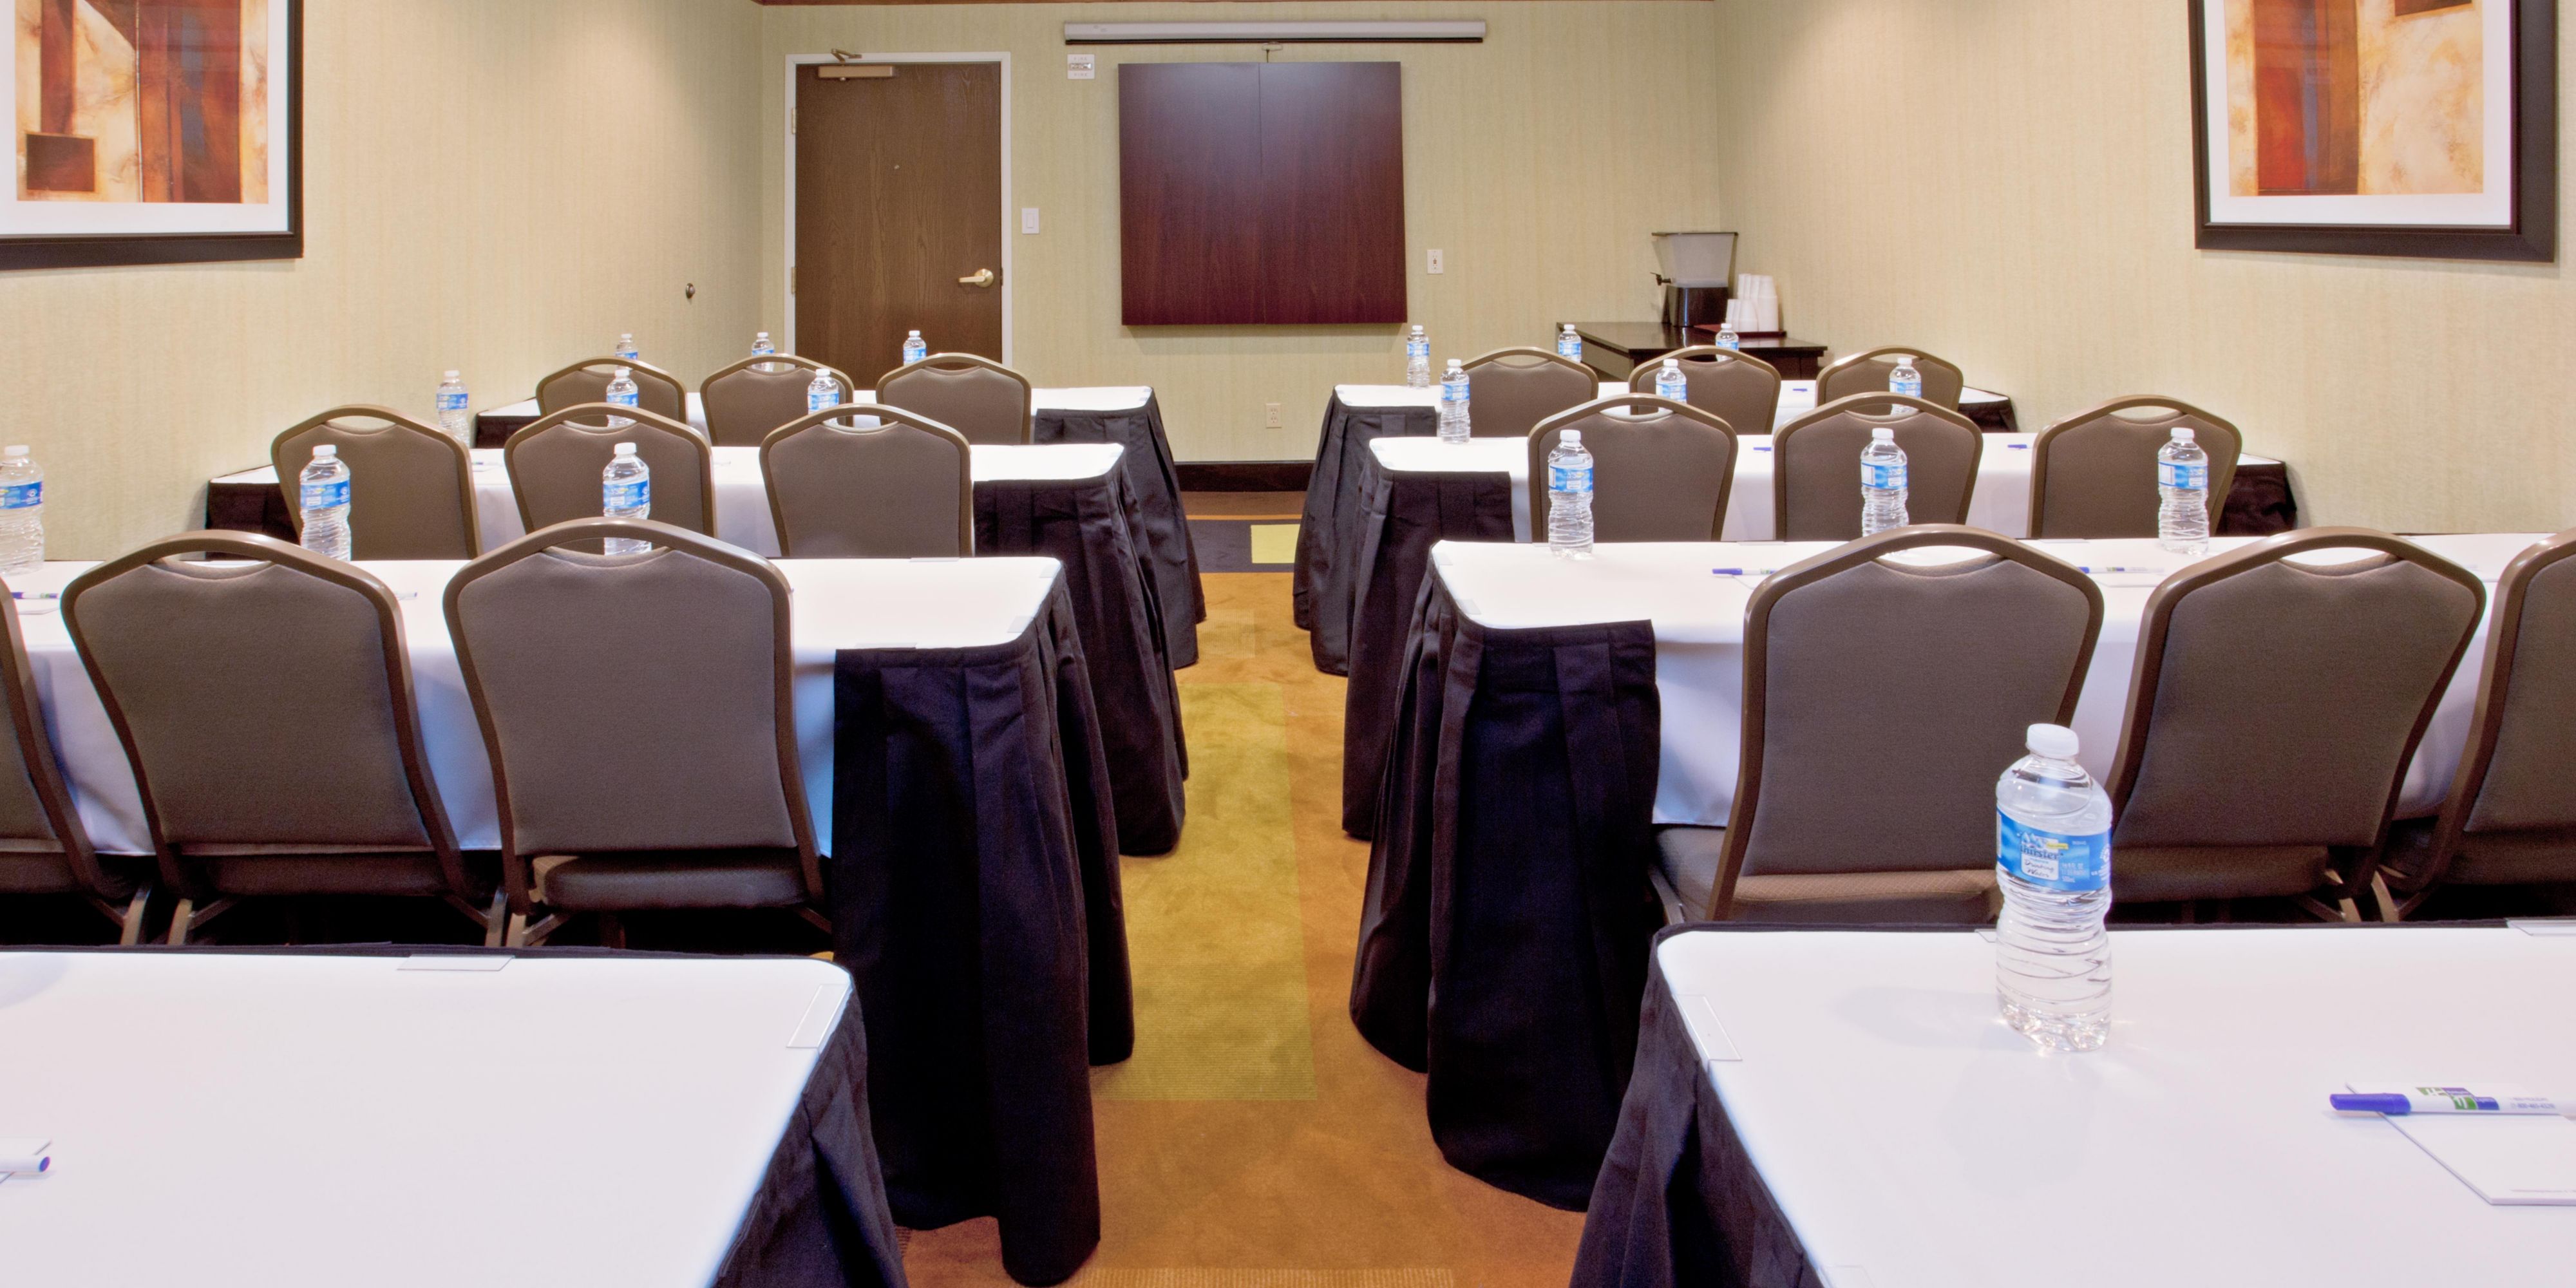 Flexible Meeting space available that can seat up to 50 people theater seating, 36 people rounds and classroom 25 people comfortably.  Call the hotel directly to book your next meeting.